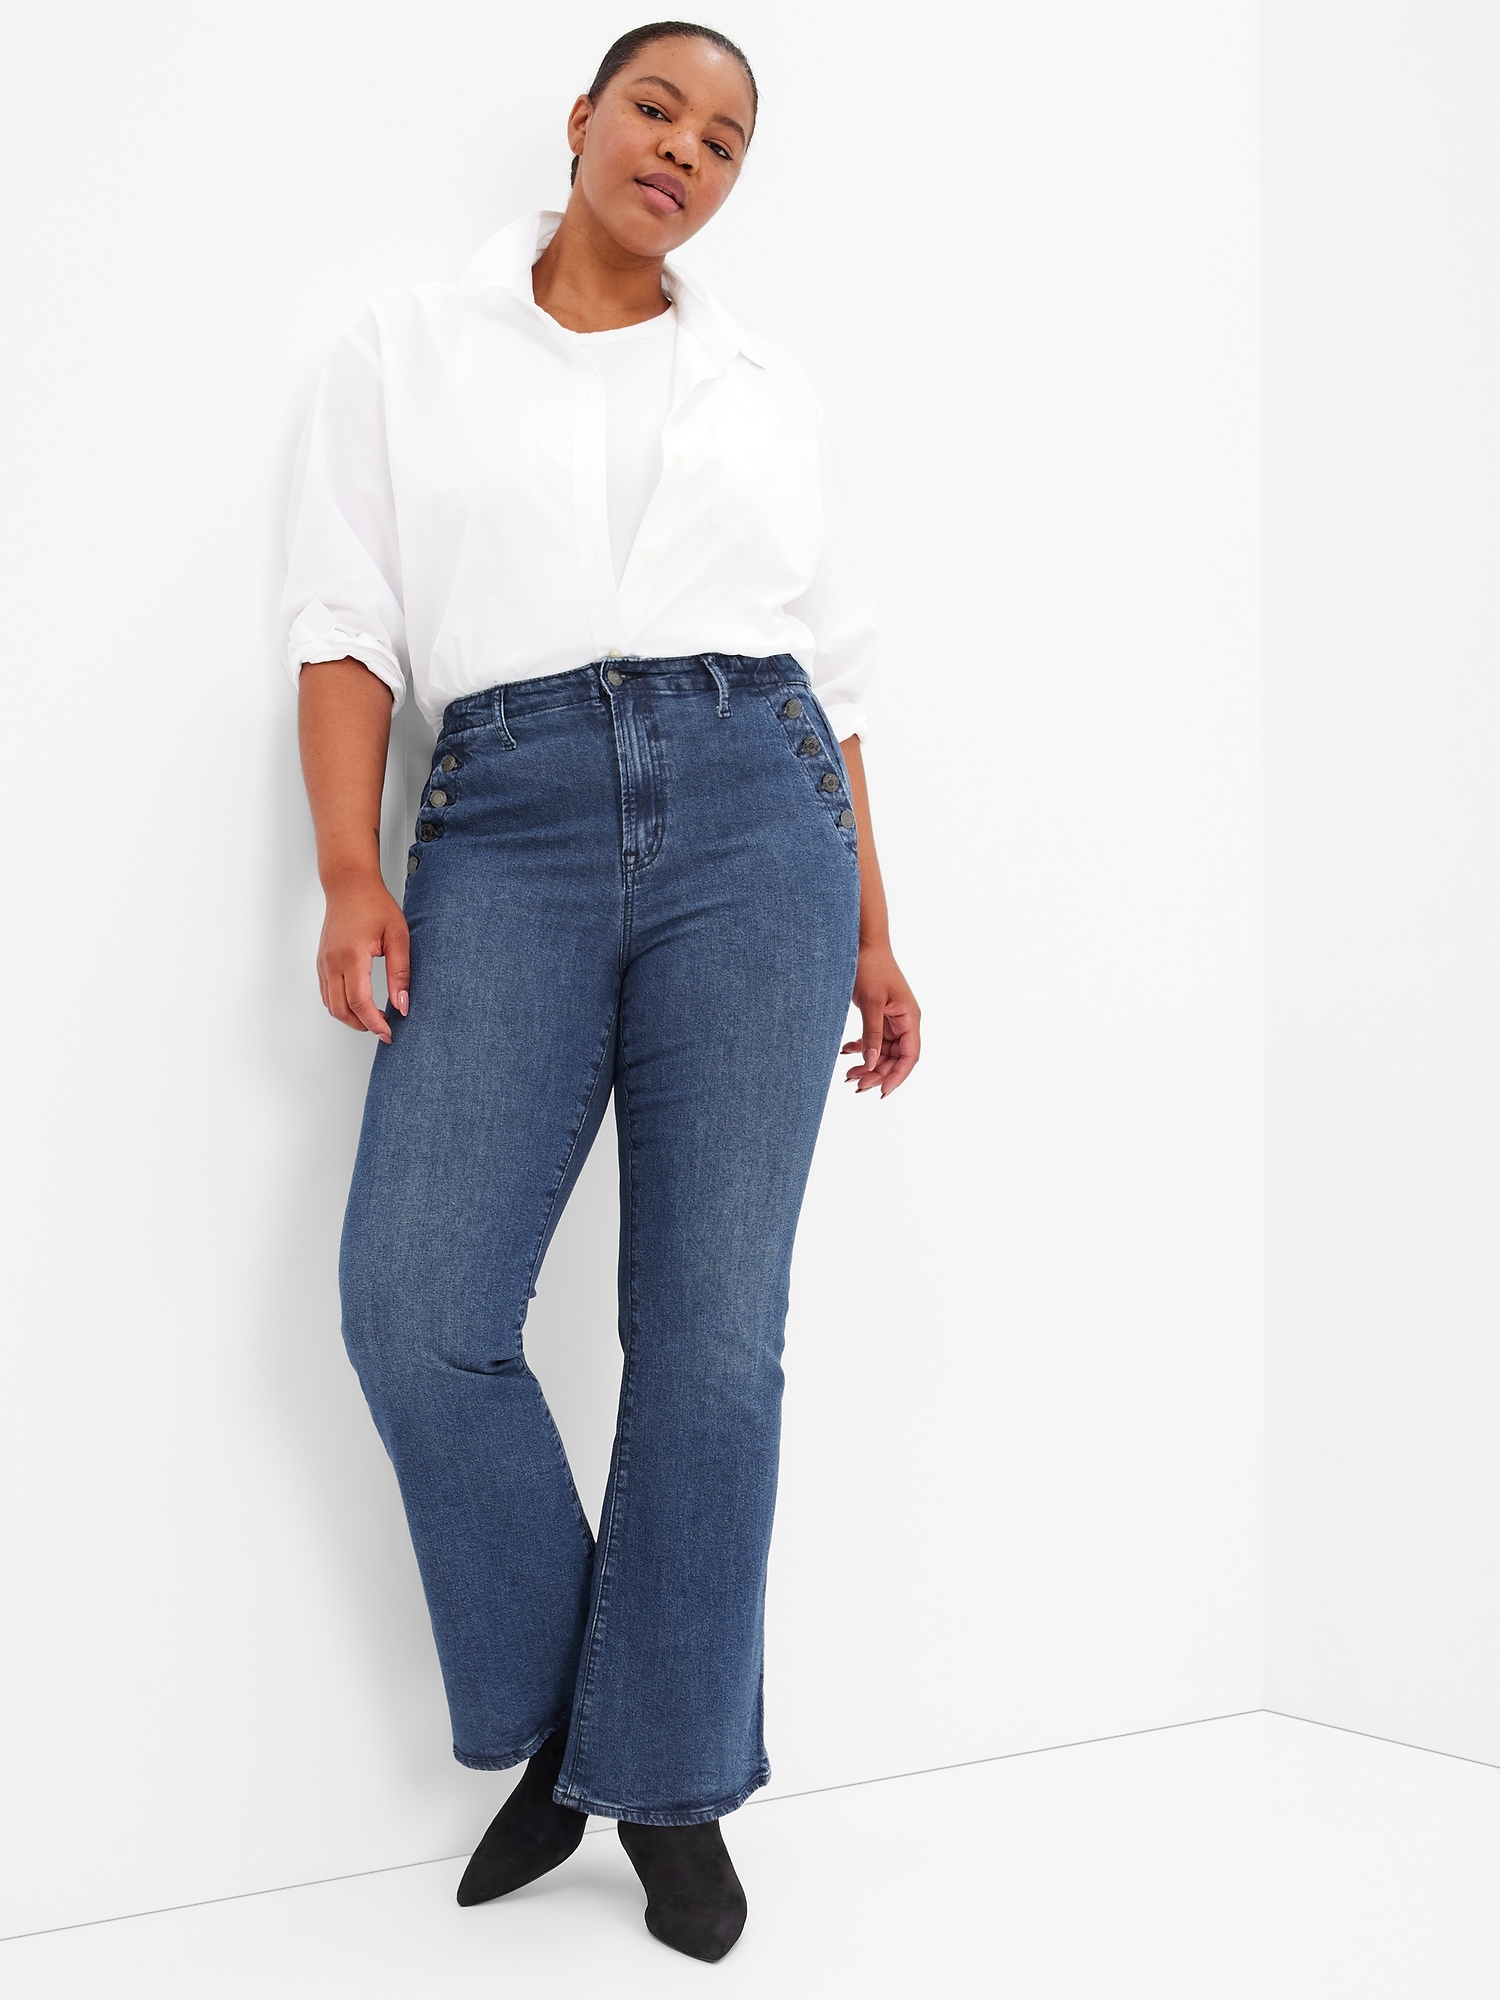 70s High Flare Light Wash High-Waisted Jeans